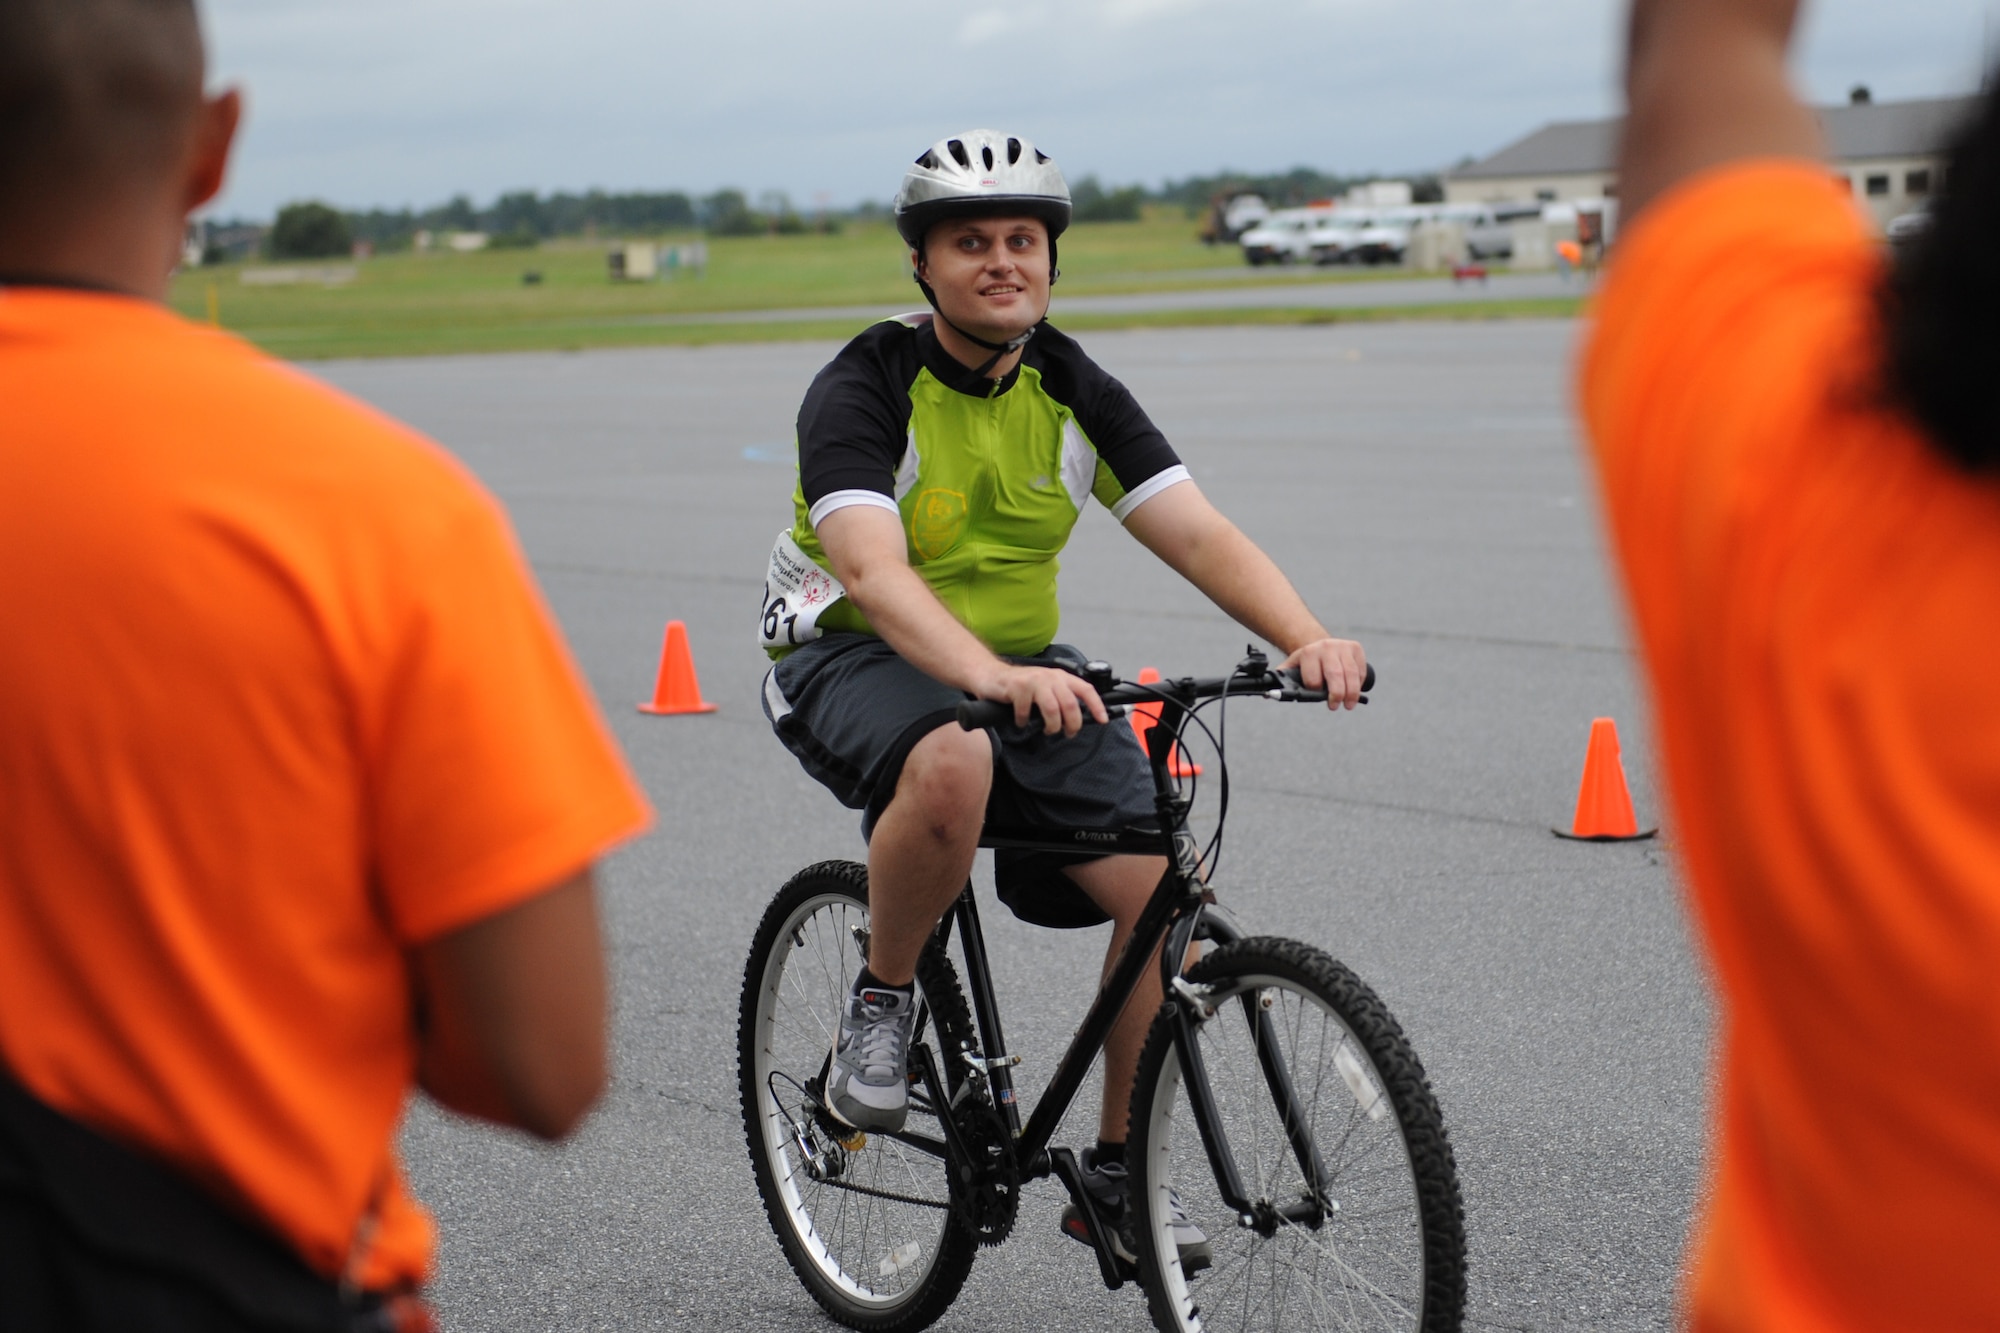 A Special Olympics of Delaware Cycling Competition athlete smiles as Team Dover volunteers cheer for him as he crosses the finish line Sept. 13, 2014 at Dover Air Force Base, Del. More than 150 volunteers from DAFB volunteered to help out at the event. (U.S. Air Force photo/Staff Sgt. Elizabeth Morris)